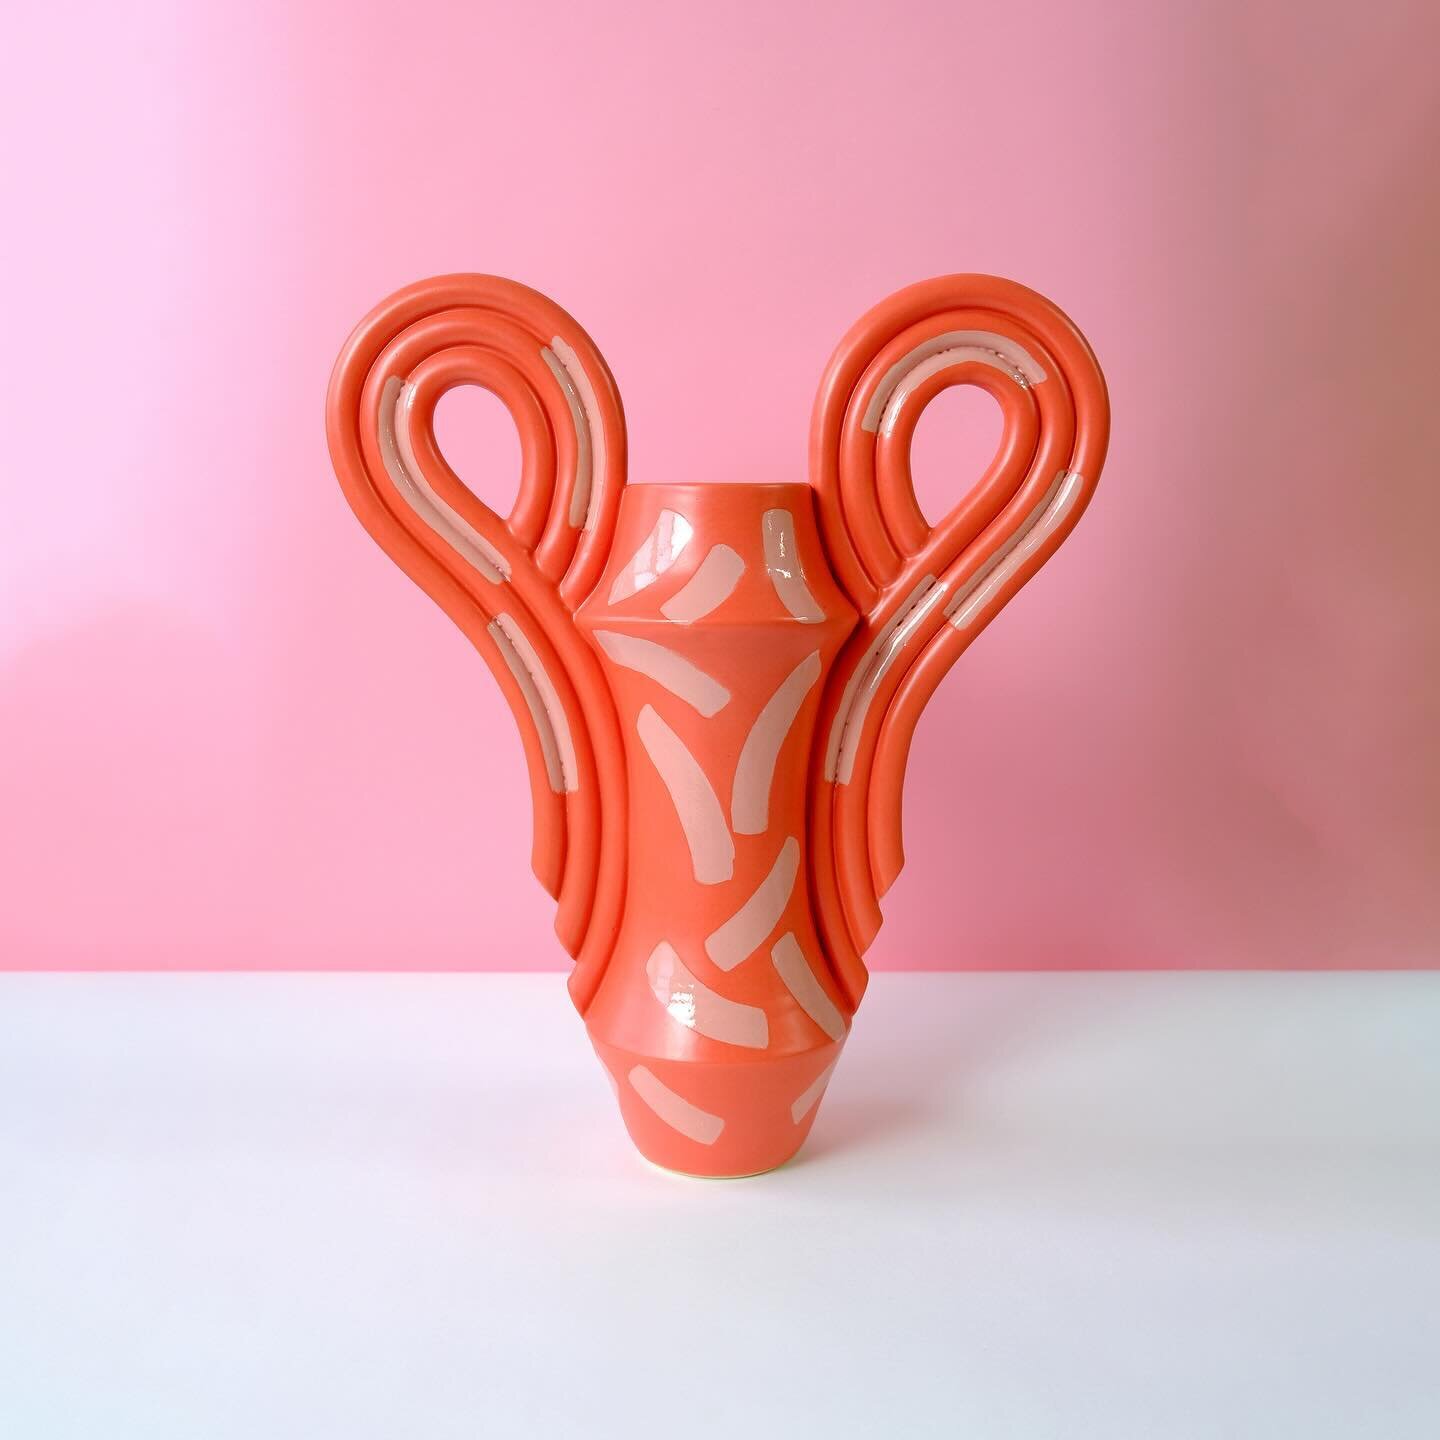 I have this proud vase in a group show this Thursday! At the inspiring and visually stunning #cultureobject for their last show in their current space. There will be so many colorful and amazing objects, made by so many great artists in a very though